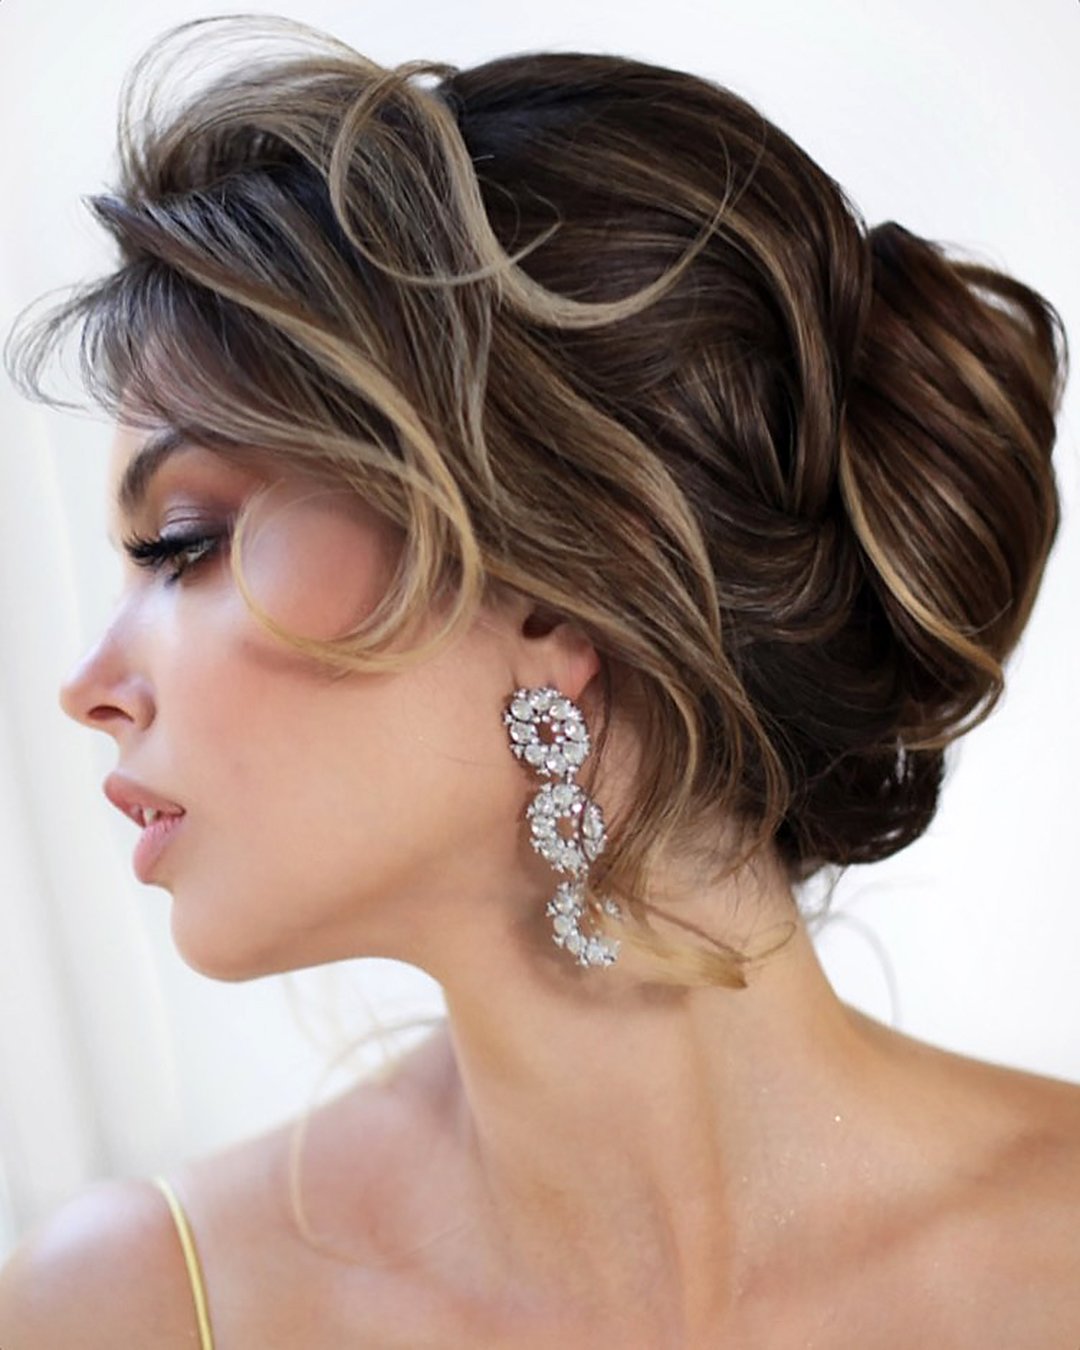 Short Formal Hairstyles: 21 Ideas to Inspire You | All Things Hair US